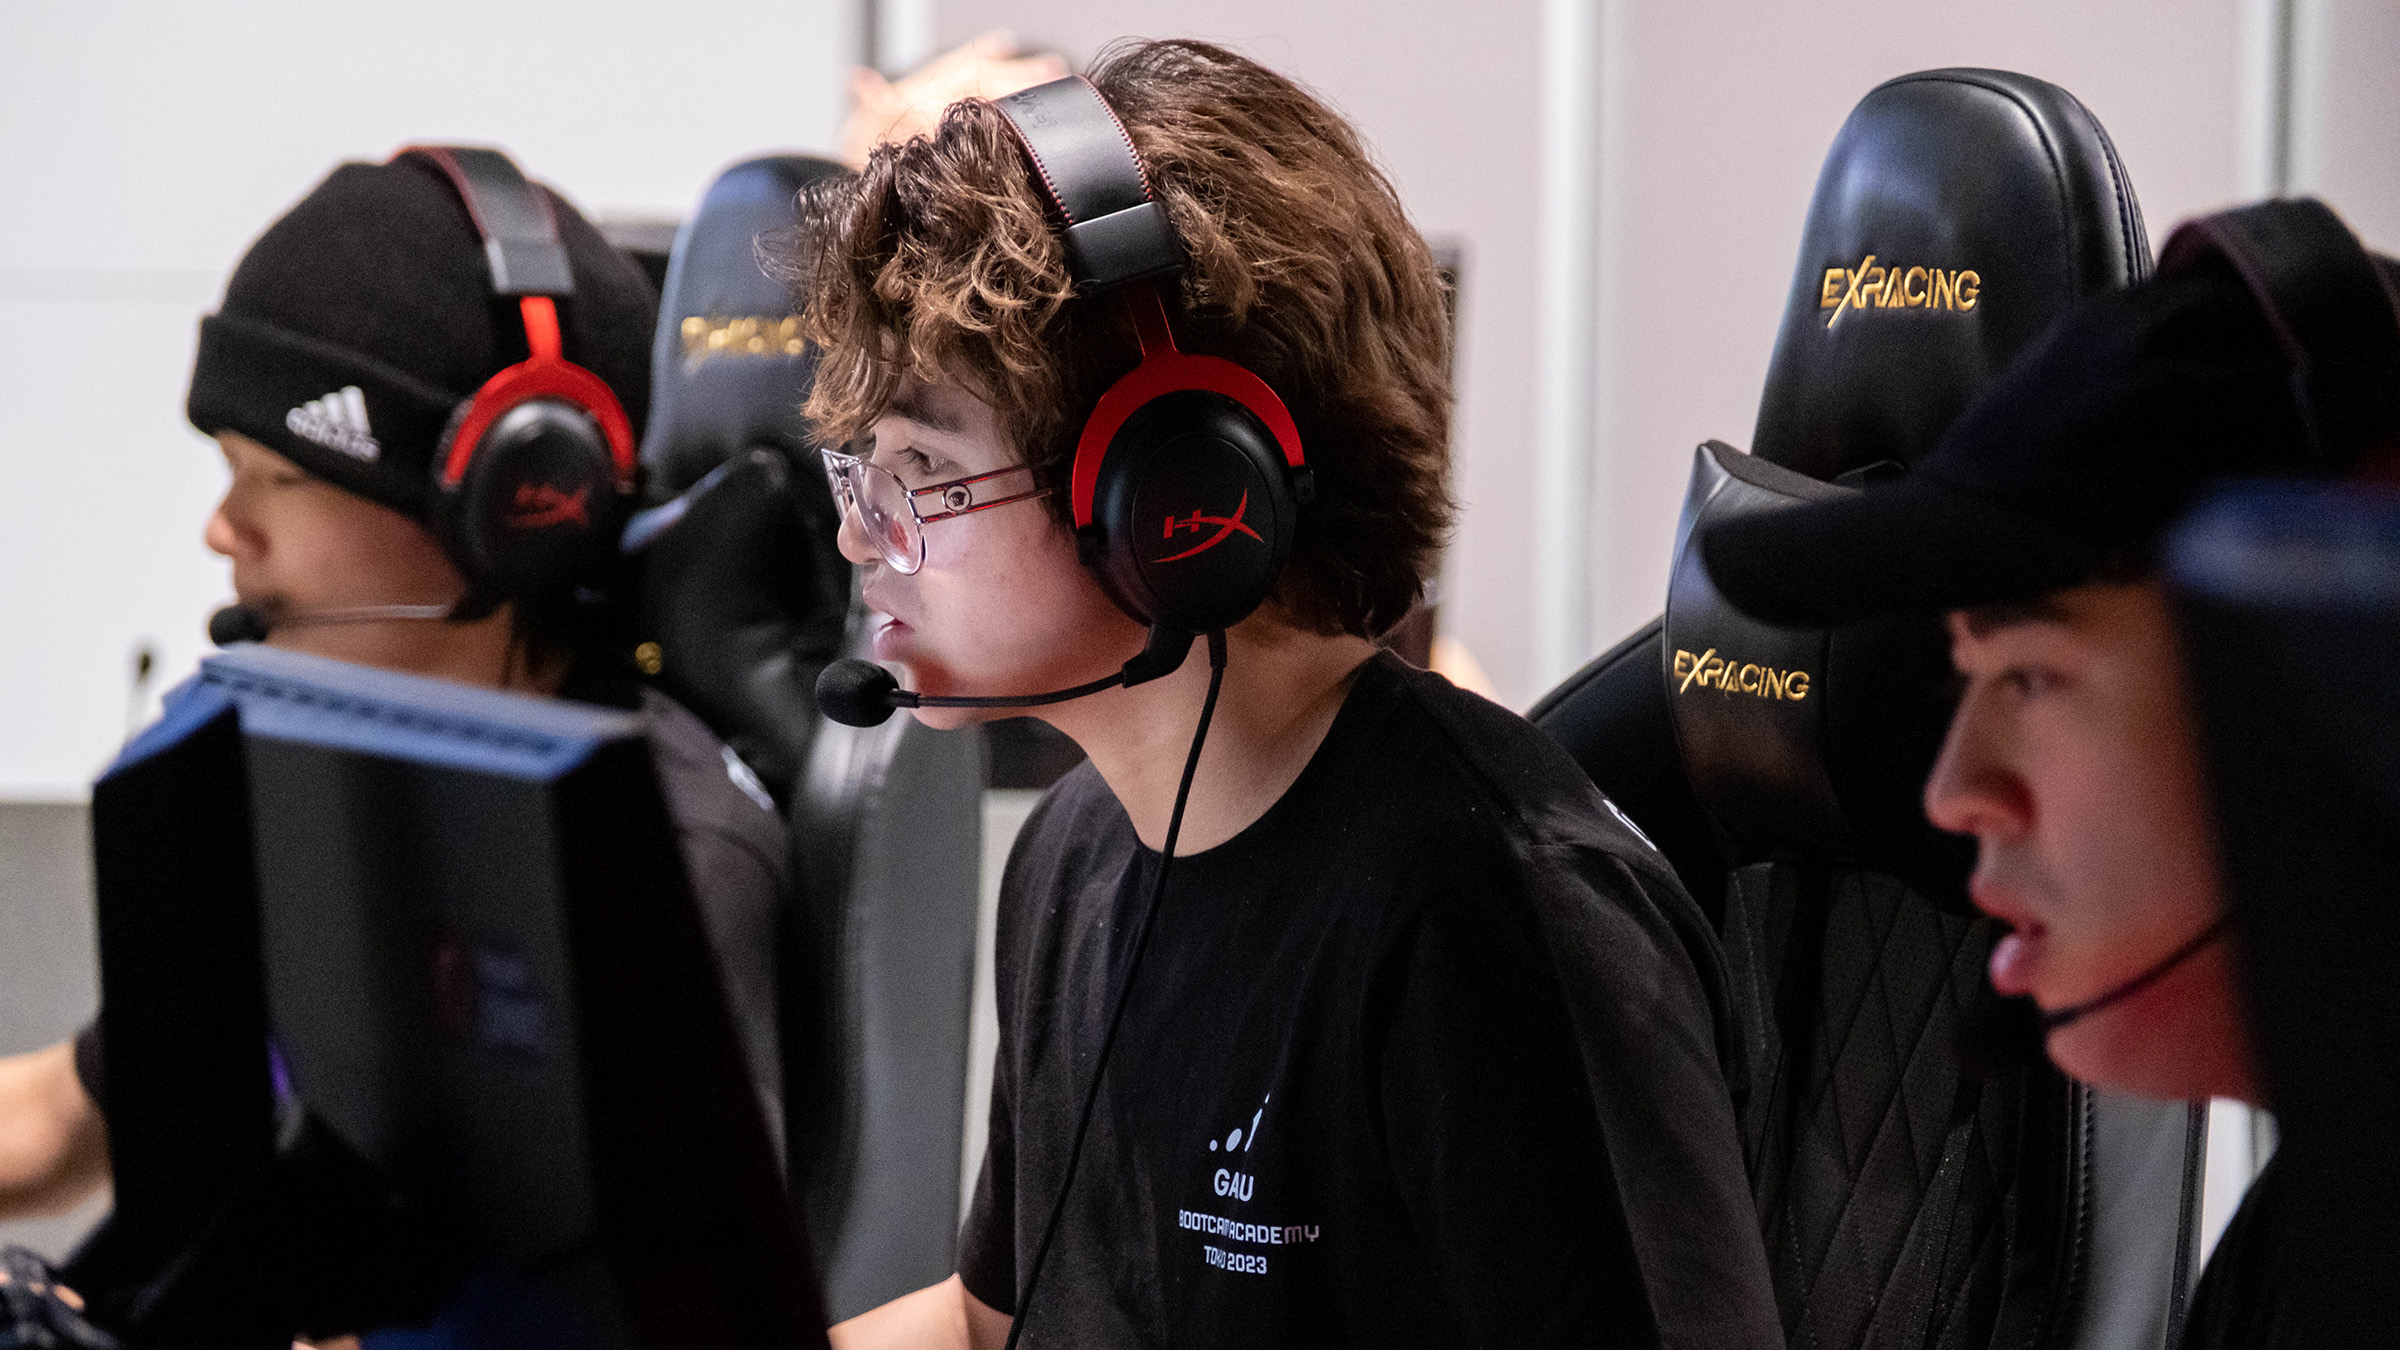 Members of TUJ's official varsity esports team working together in a Valorant exhibition match.